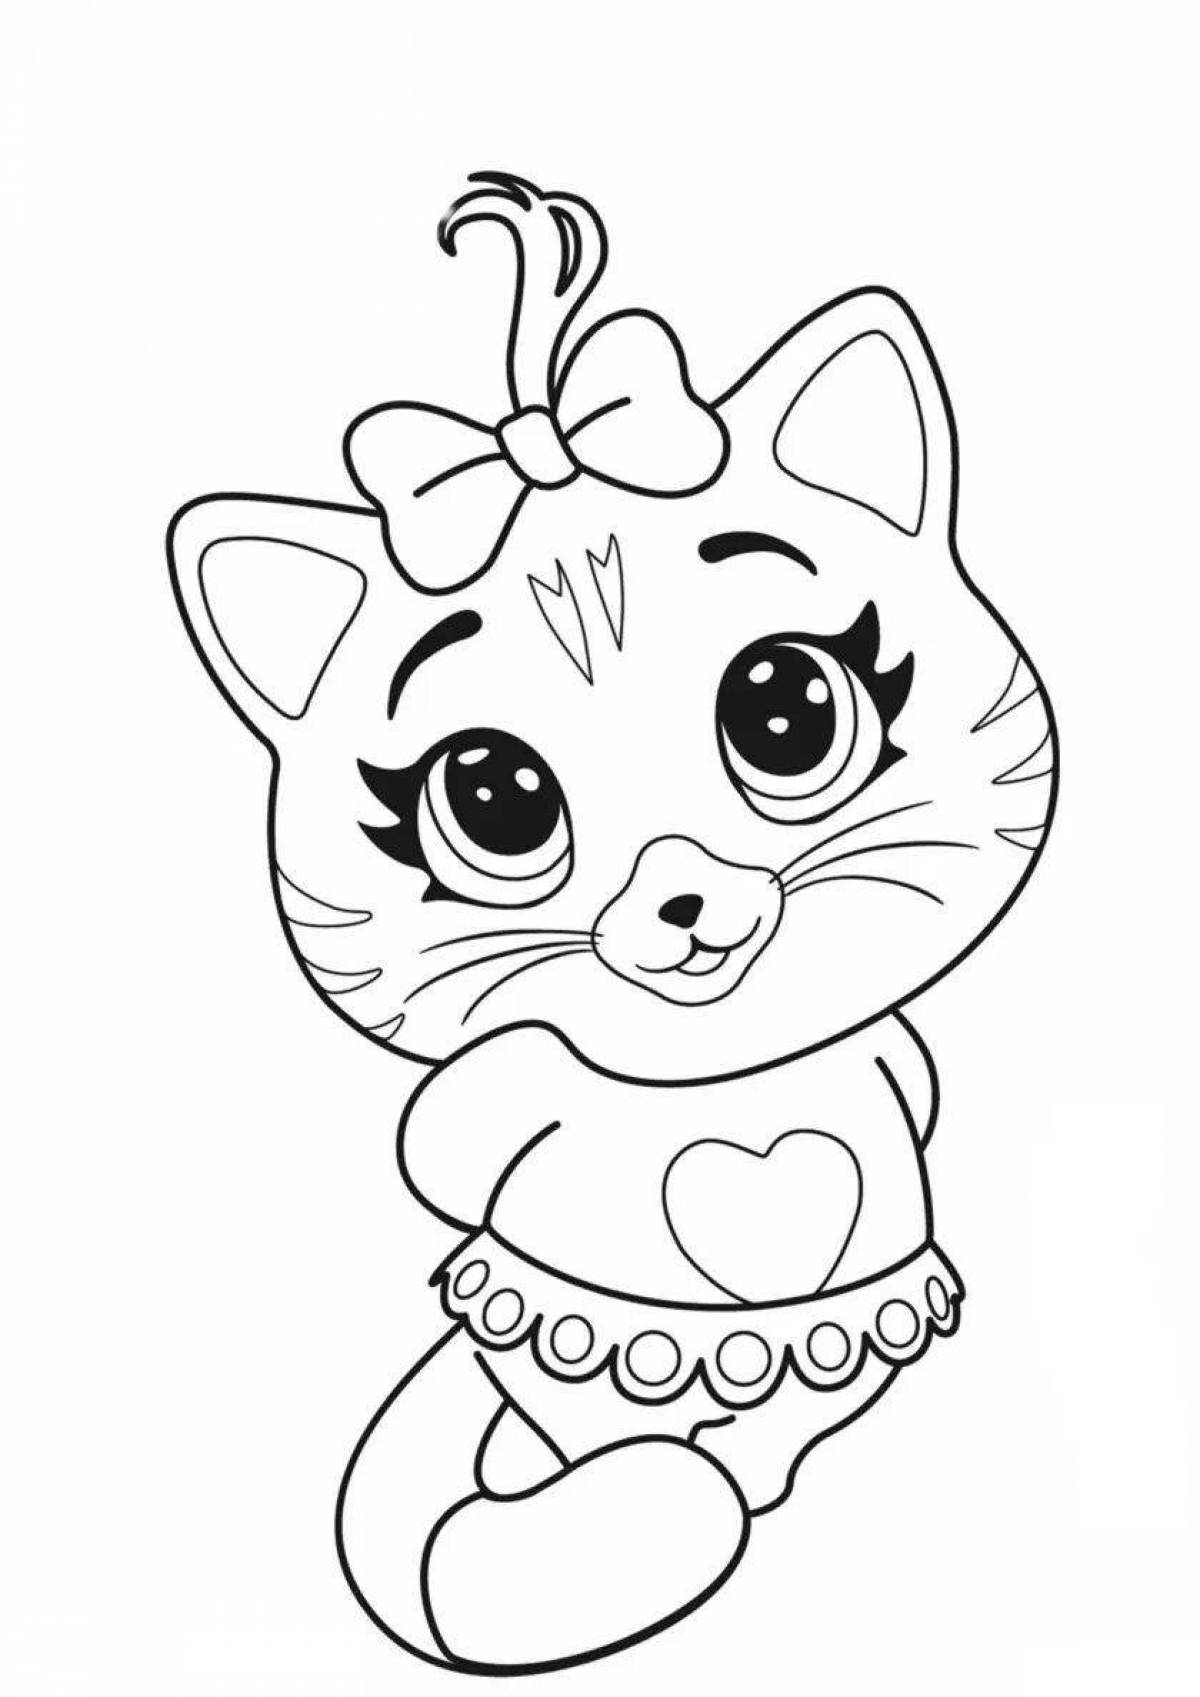 Adorable cute cat coloring book for kids